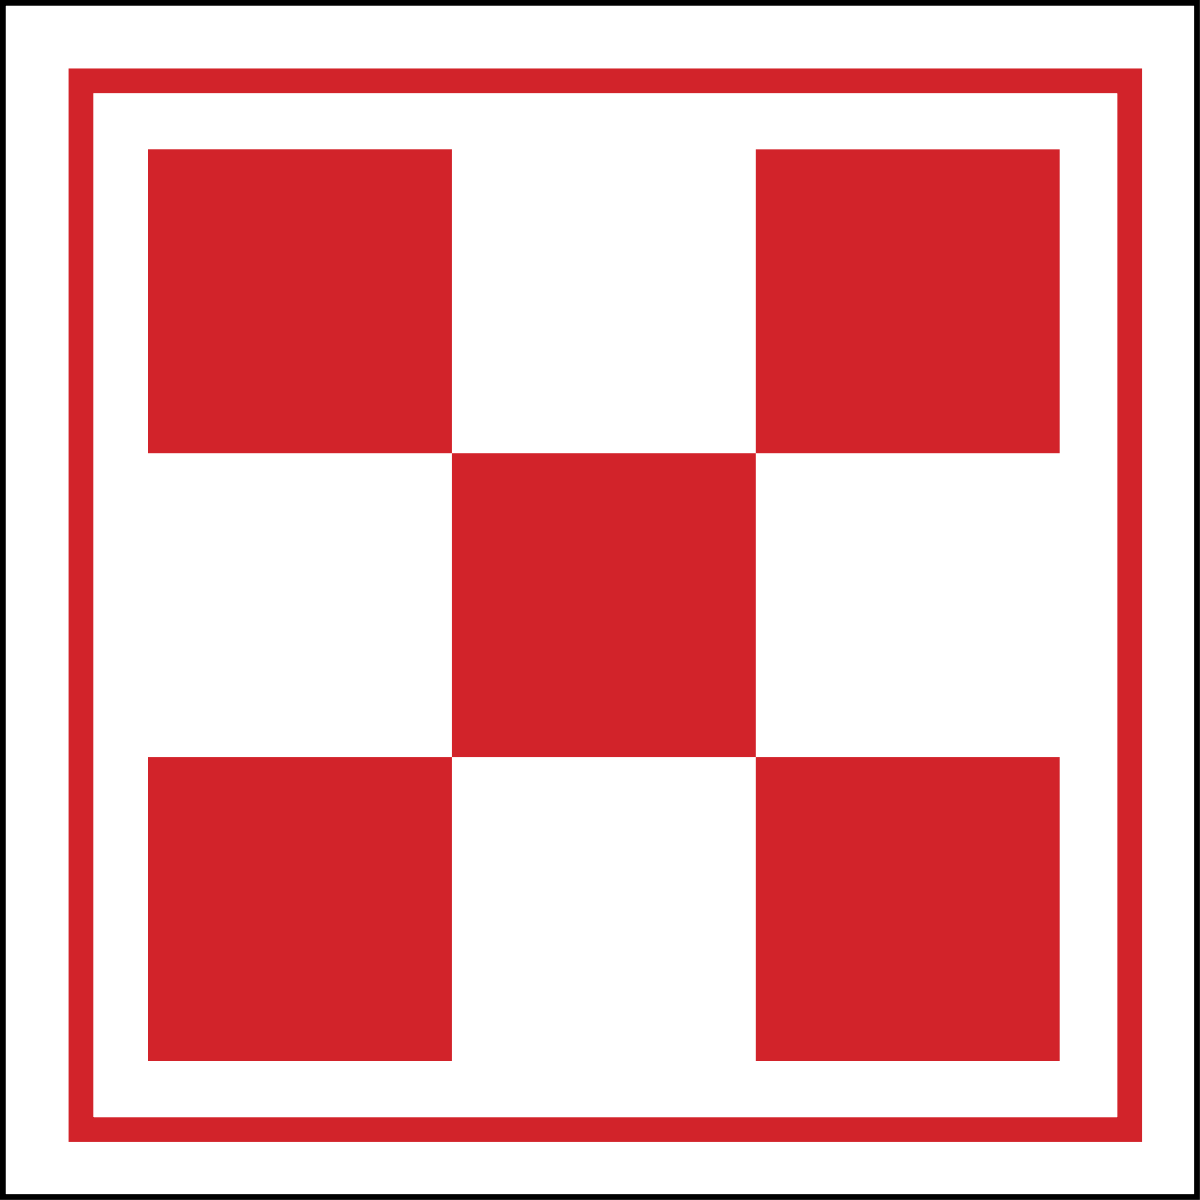 Red and White Square Logo - Ralston Purina